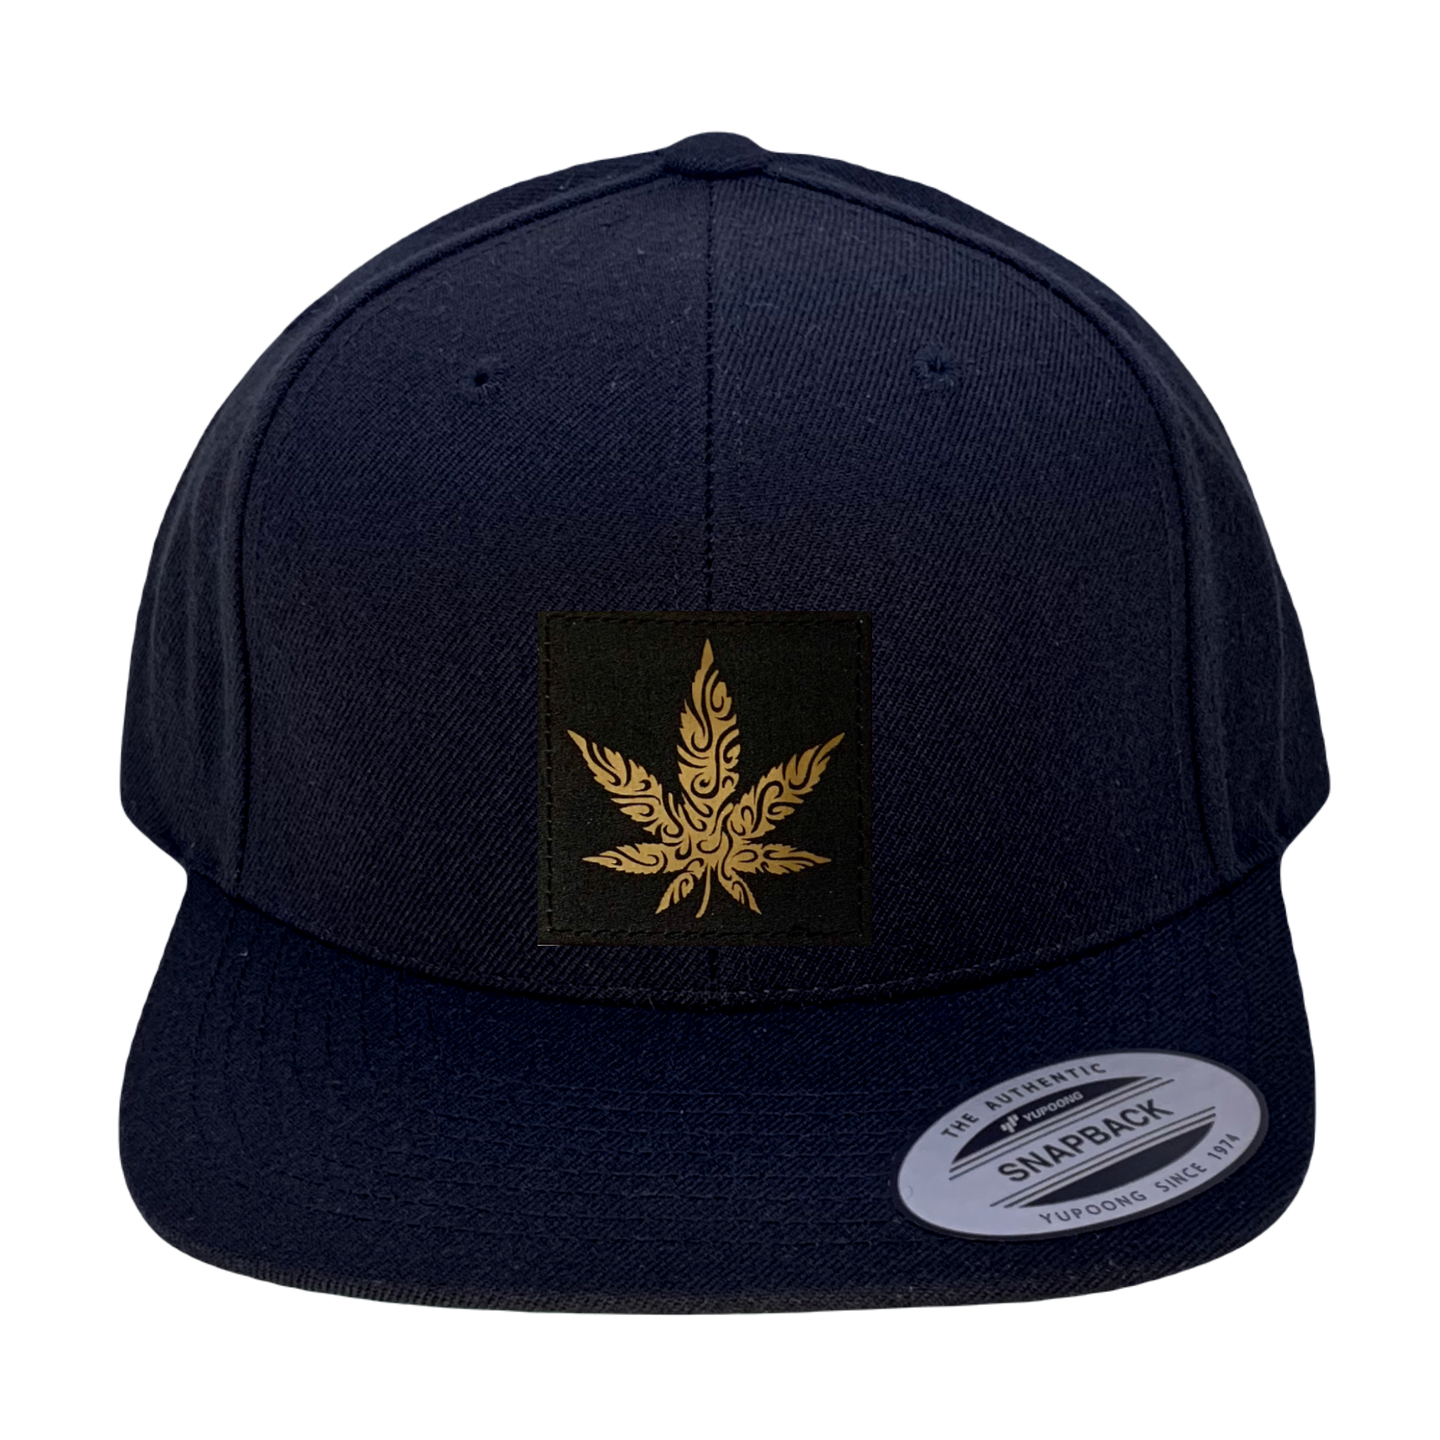 Yupoong 6089 Flat Bill, Hat / Visor with Green Under Bill and Handmade Vegan Leather Black/Gold Cannabis Patch by Buddha Gear.